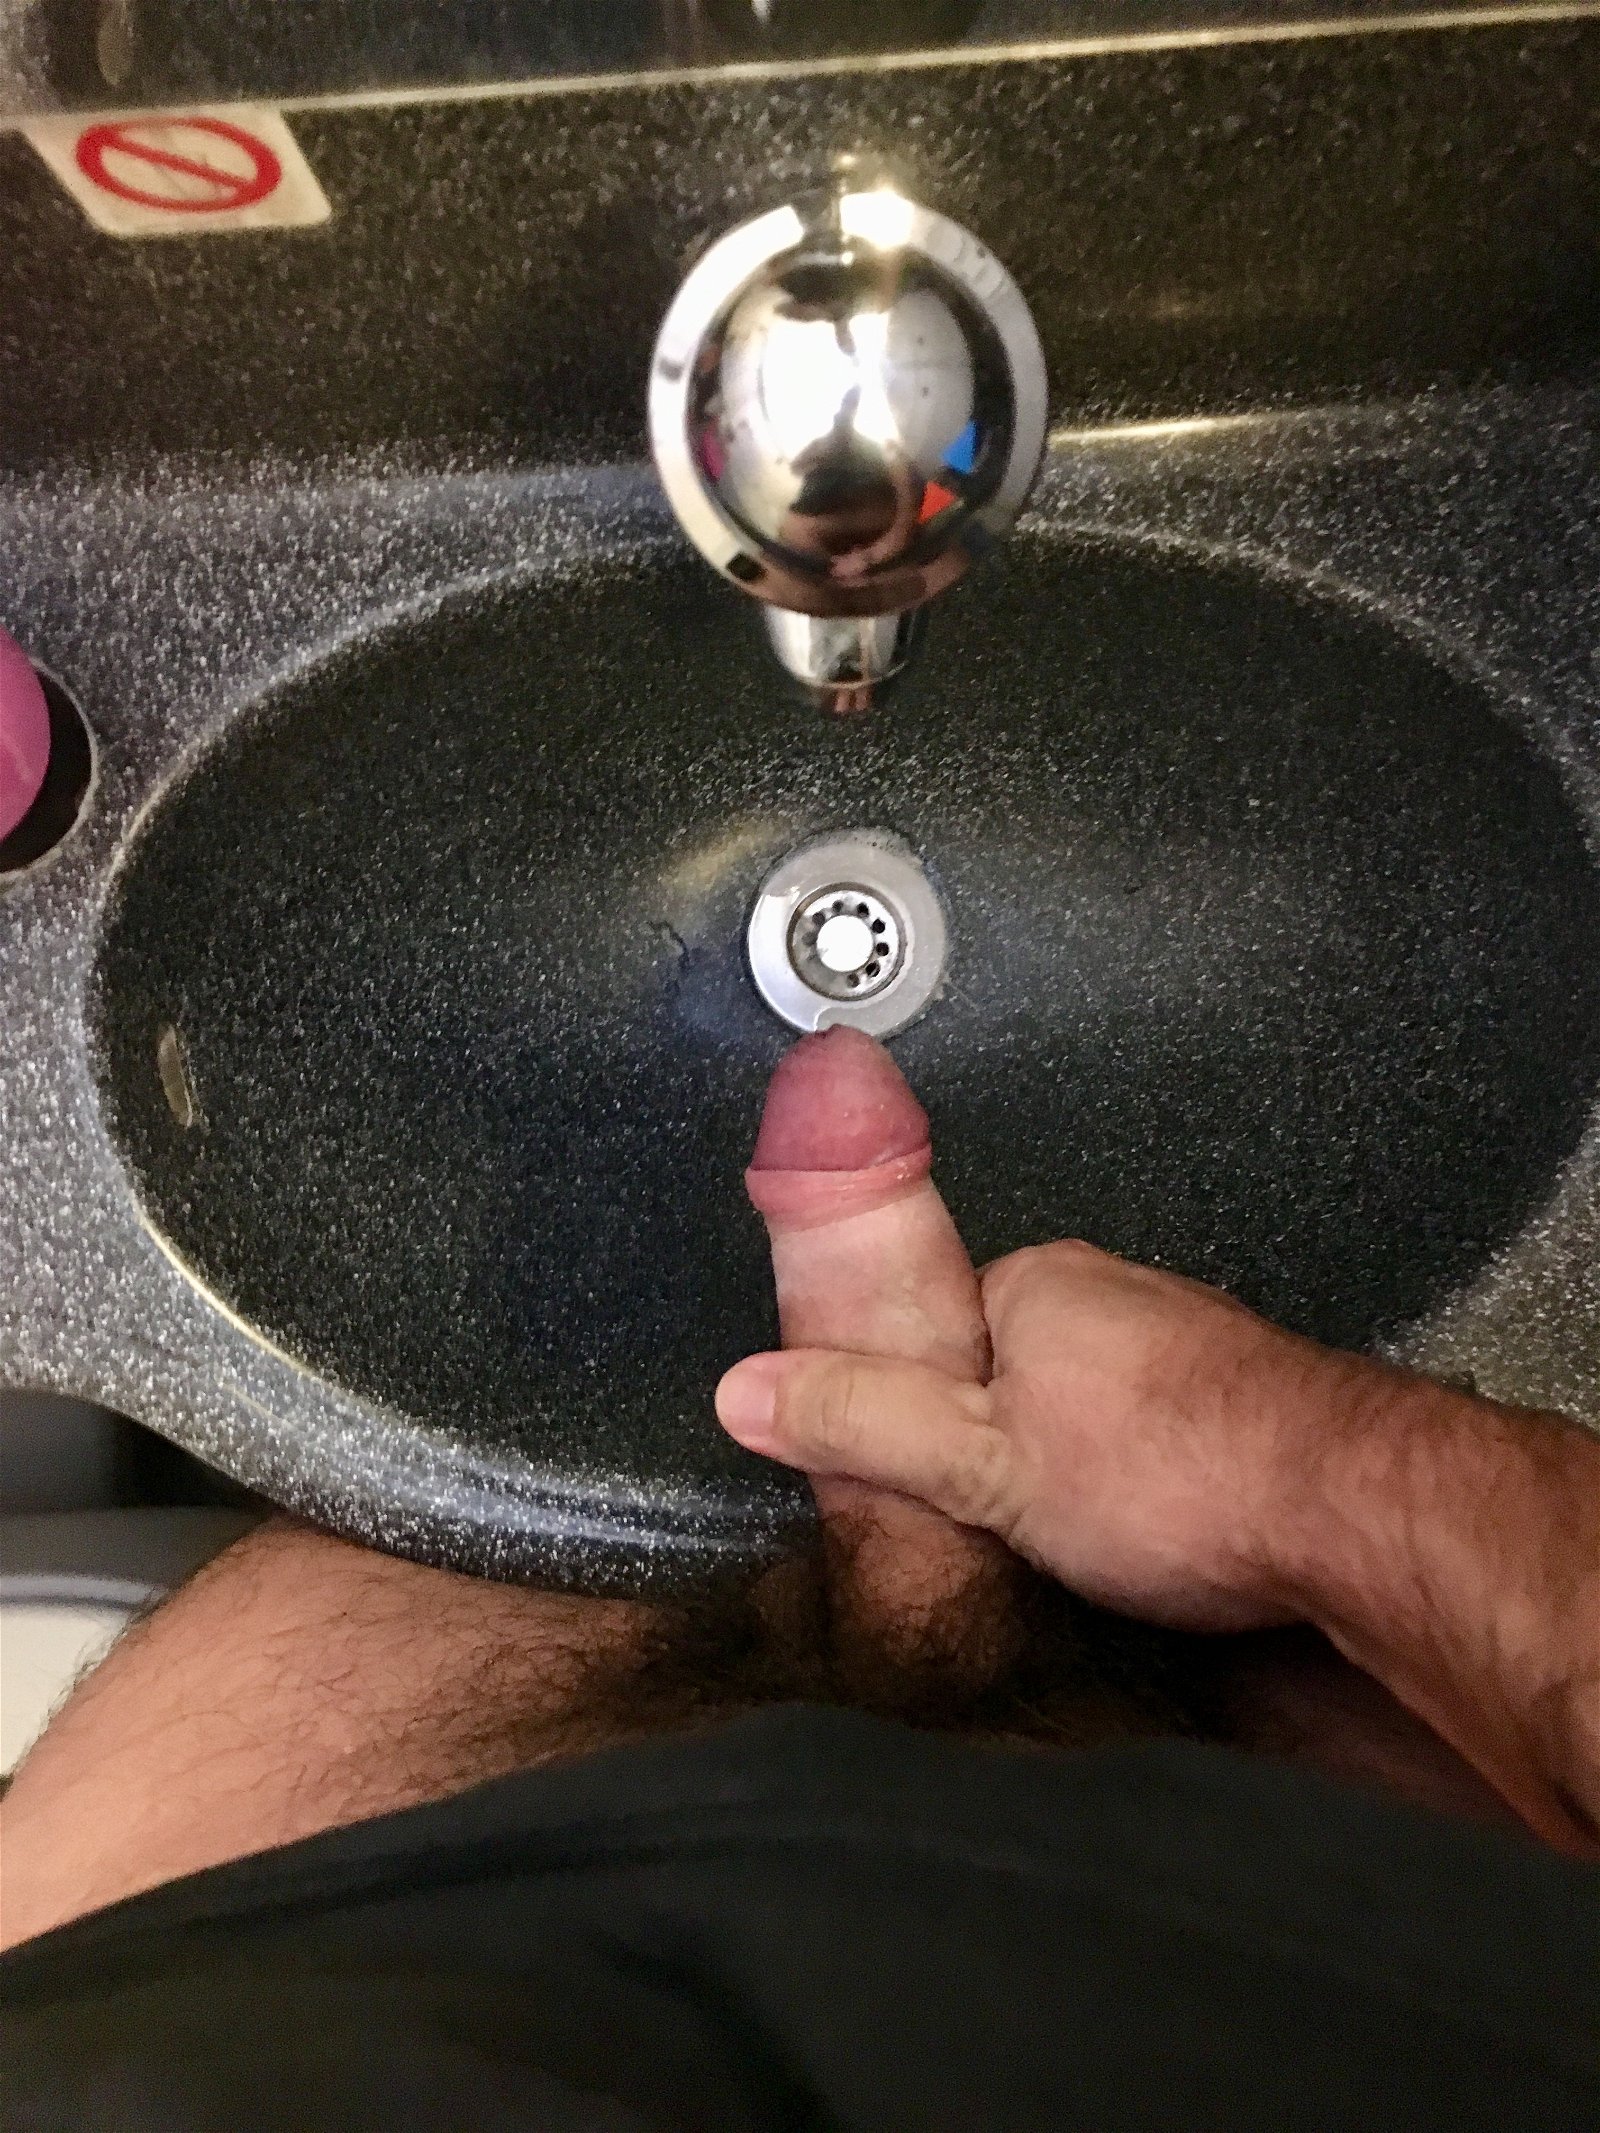 Photo by Fan in Heat with the username @faninheat, who is a verified user,  December 10, 2018 at 10:18 AM and the text says 'That time I took some pics in the airplane’s restroom I ended up cumming in the sink. I think it got clogged with the slime.
#faninheat #amateur #gay #gayamateur #gayporn #cock #uncut #foreskin #cum #cumshot #jerkingoff'